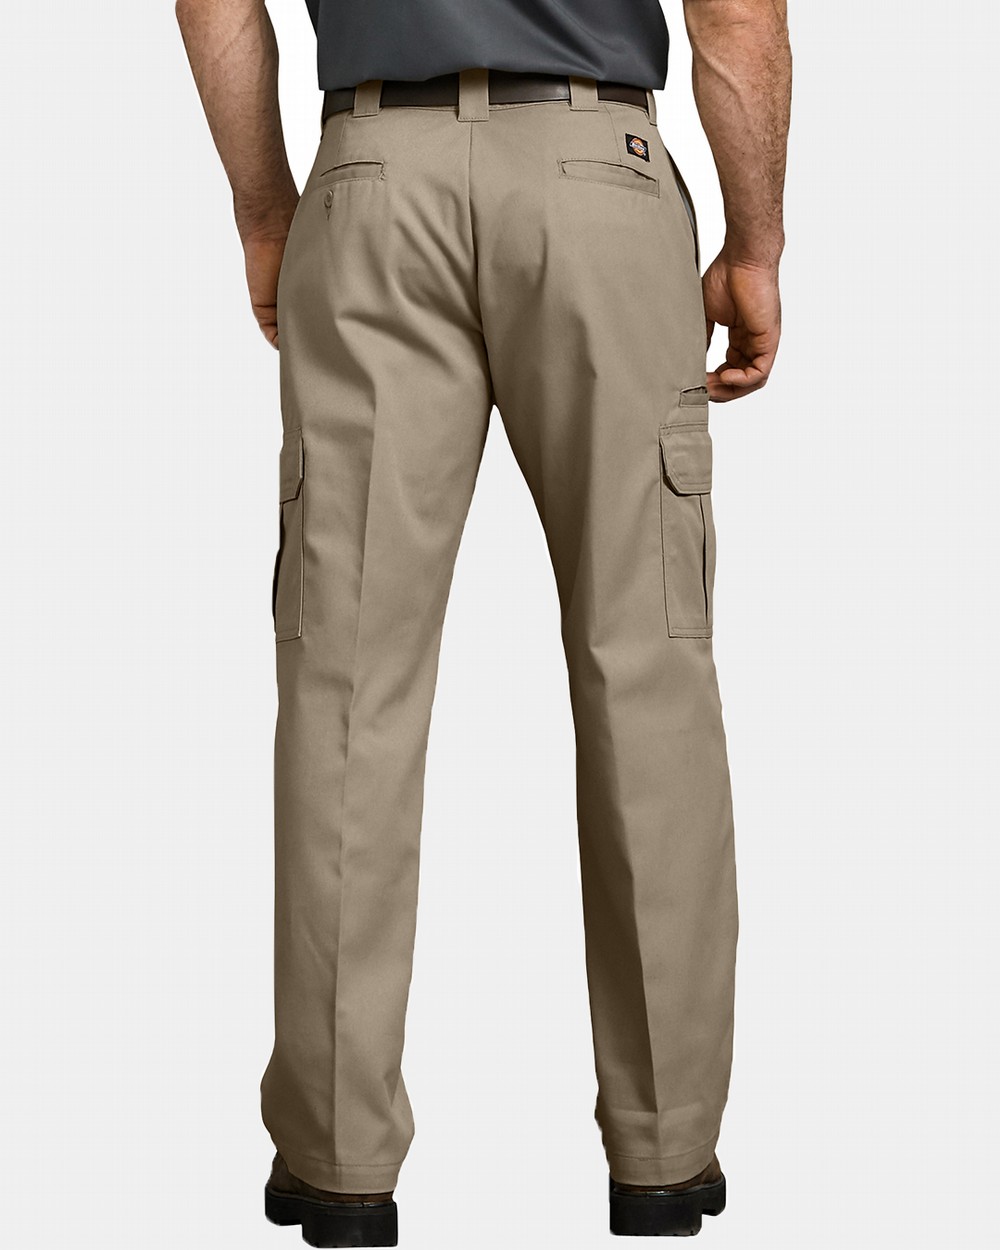 Dickies Relaxed Fit Straight Leg Cargo Work Pant  Greenwich Safety